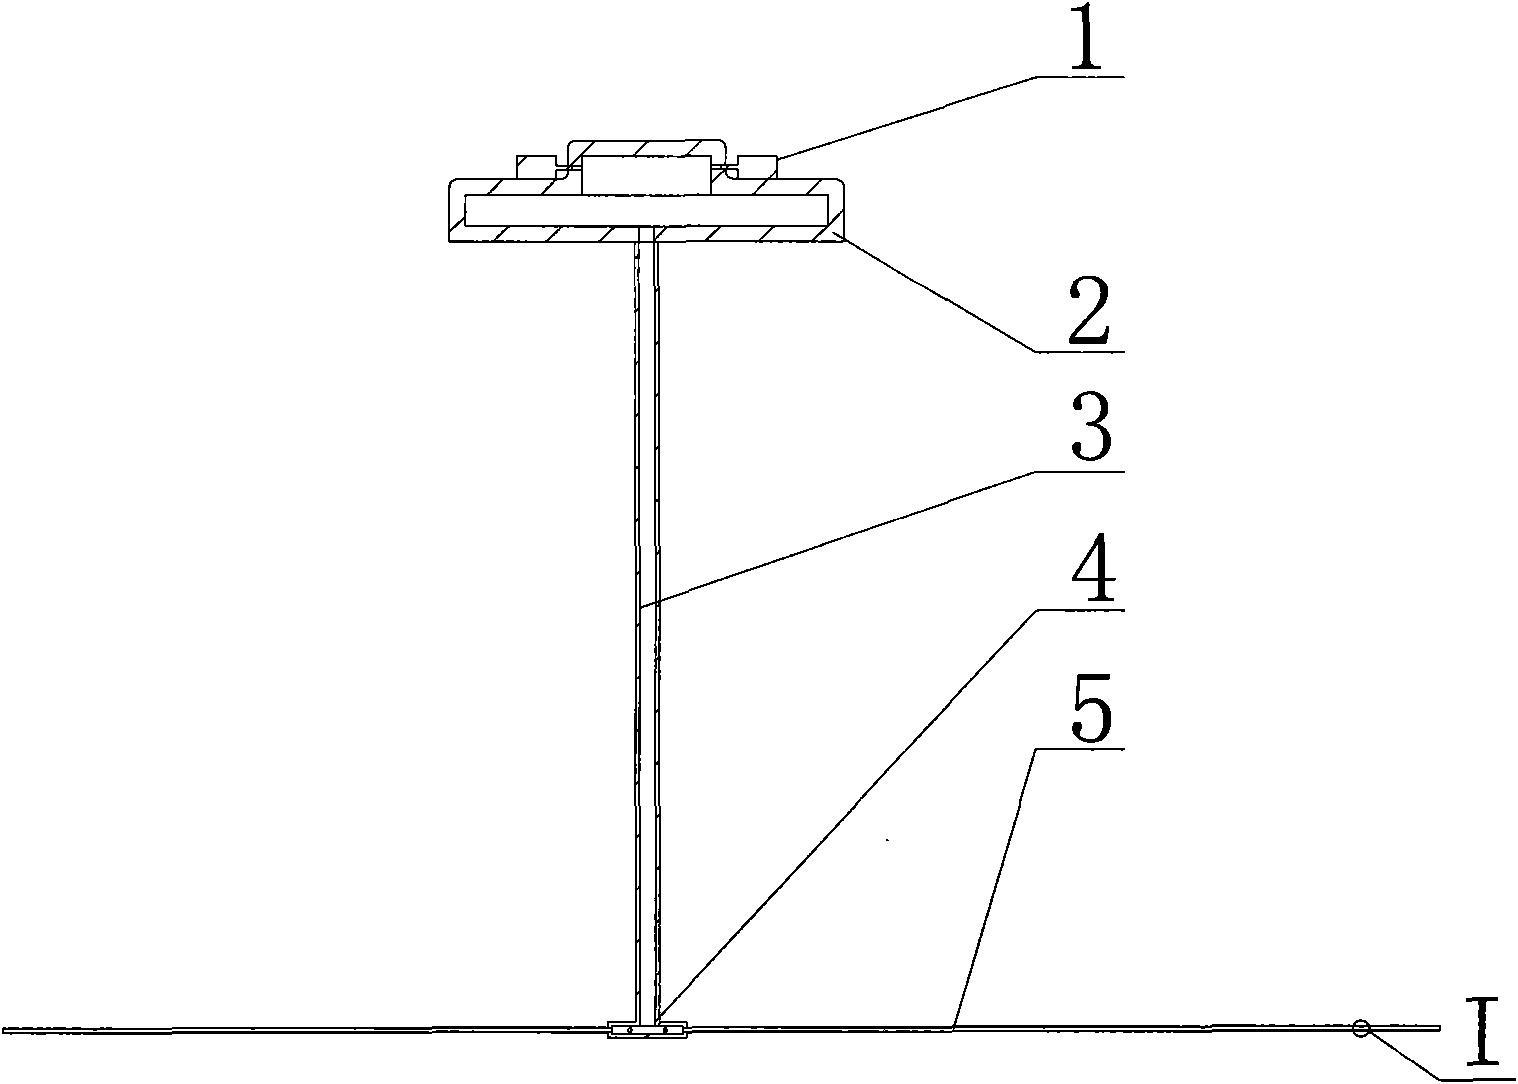 Shallow sea pipeline seafloor nutrient salt gas injecting and elevating device